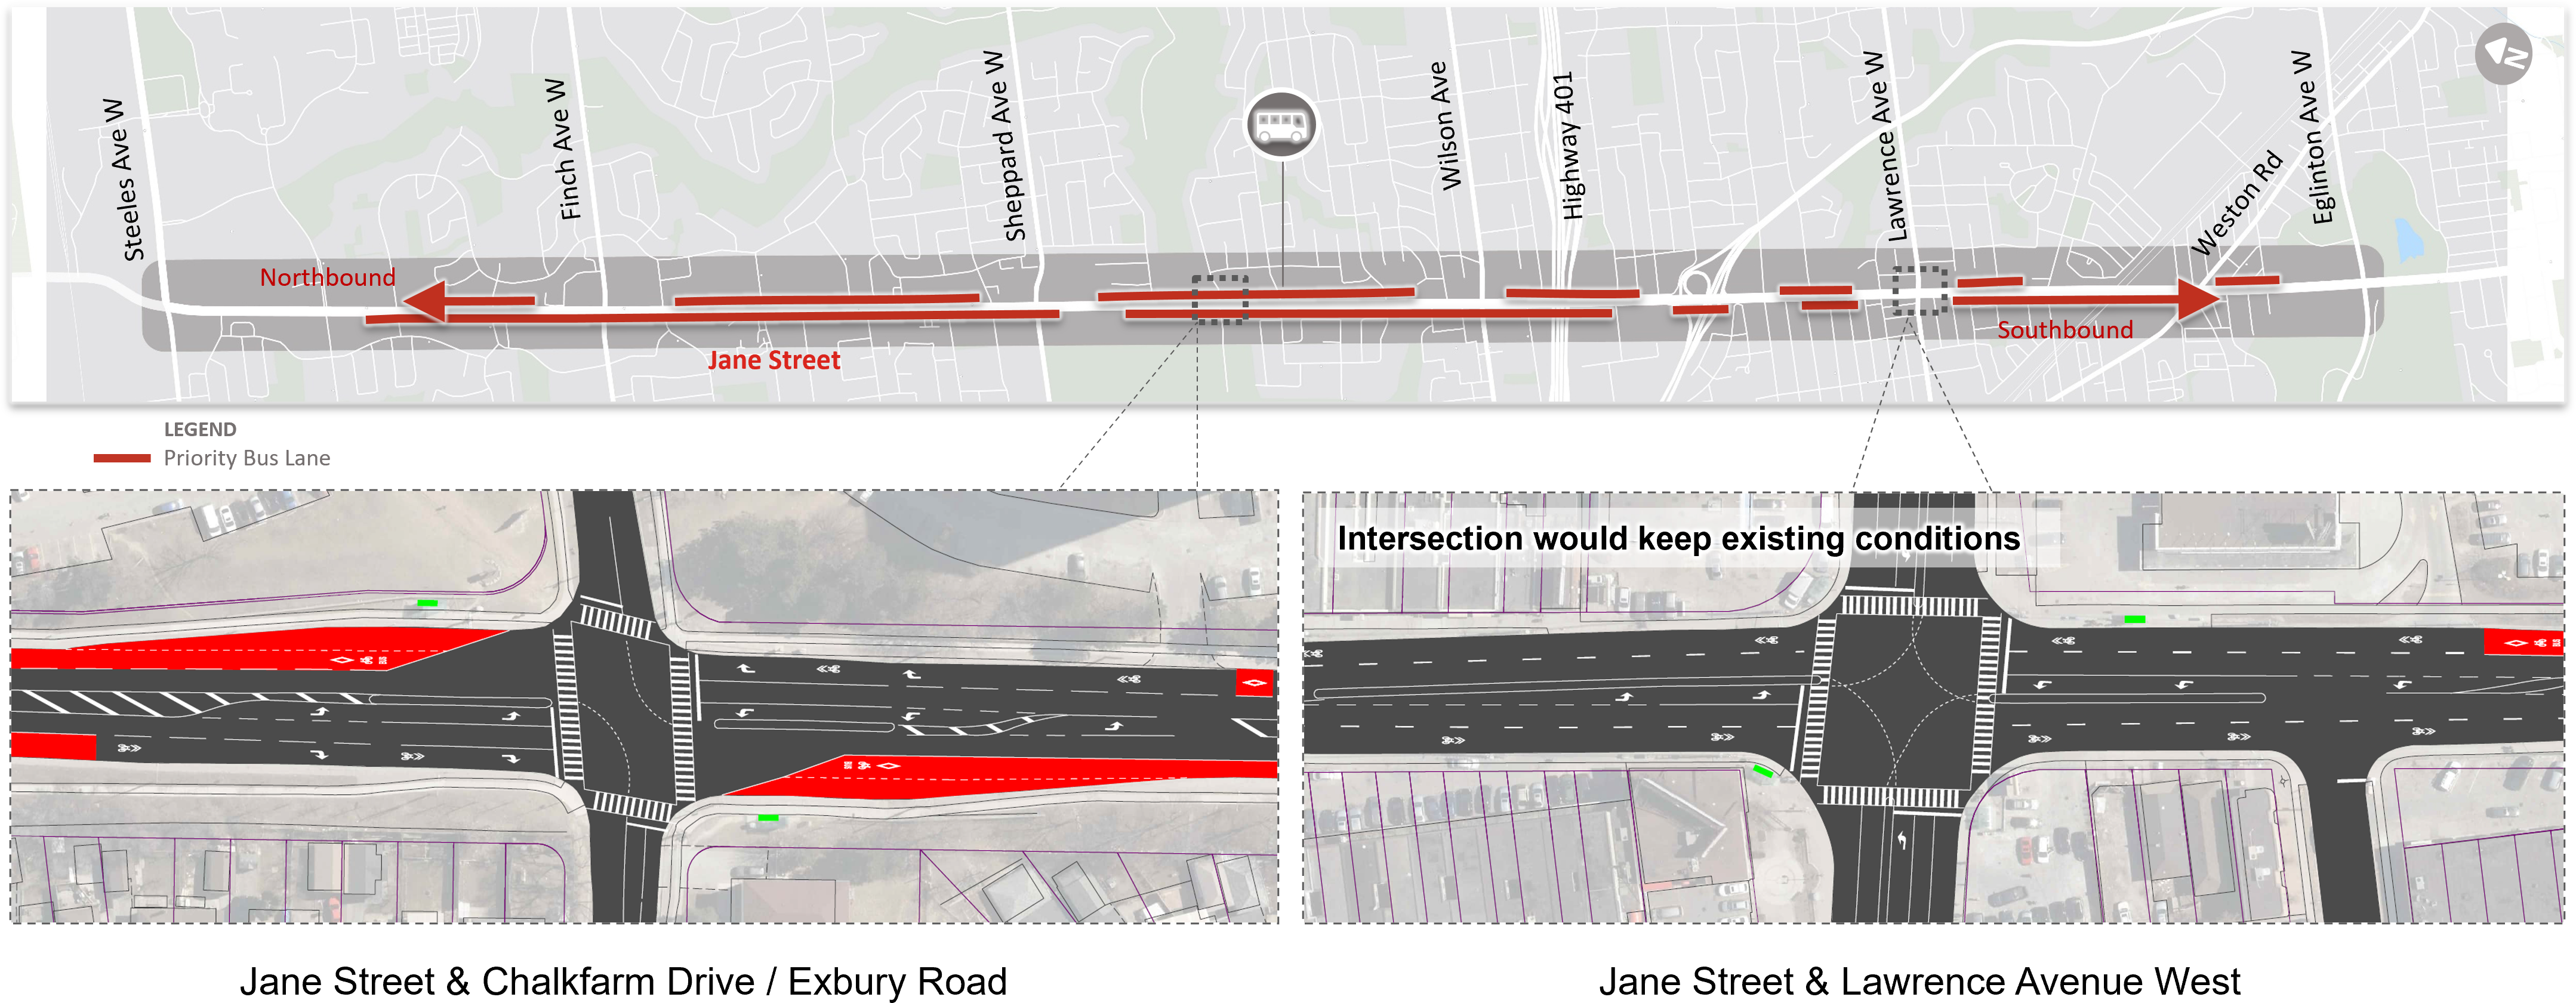 Conceptual map of Jane Street showing mixed-traffic curb lanes converted to continuous, curbside priority bus lanes only at key road segments (shown by red paint) for buses (including school buses), emergency vehicles and bicycles.